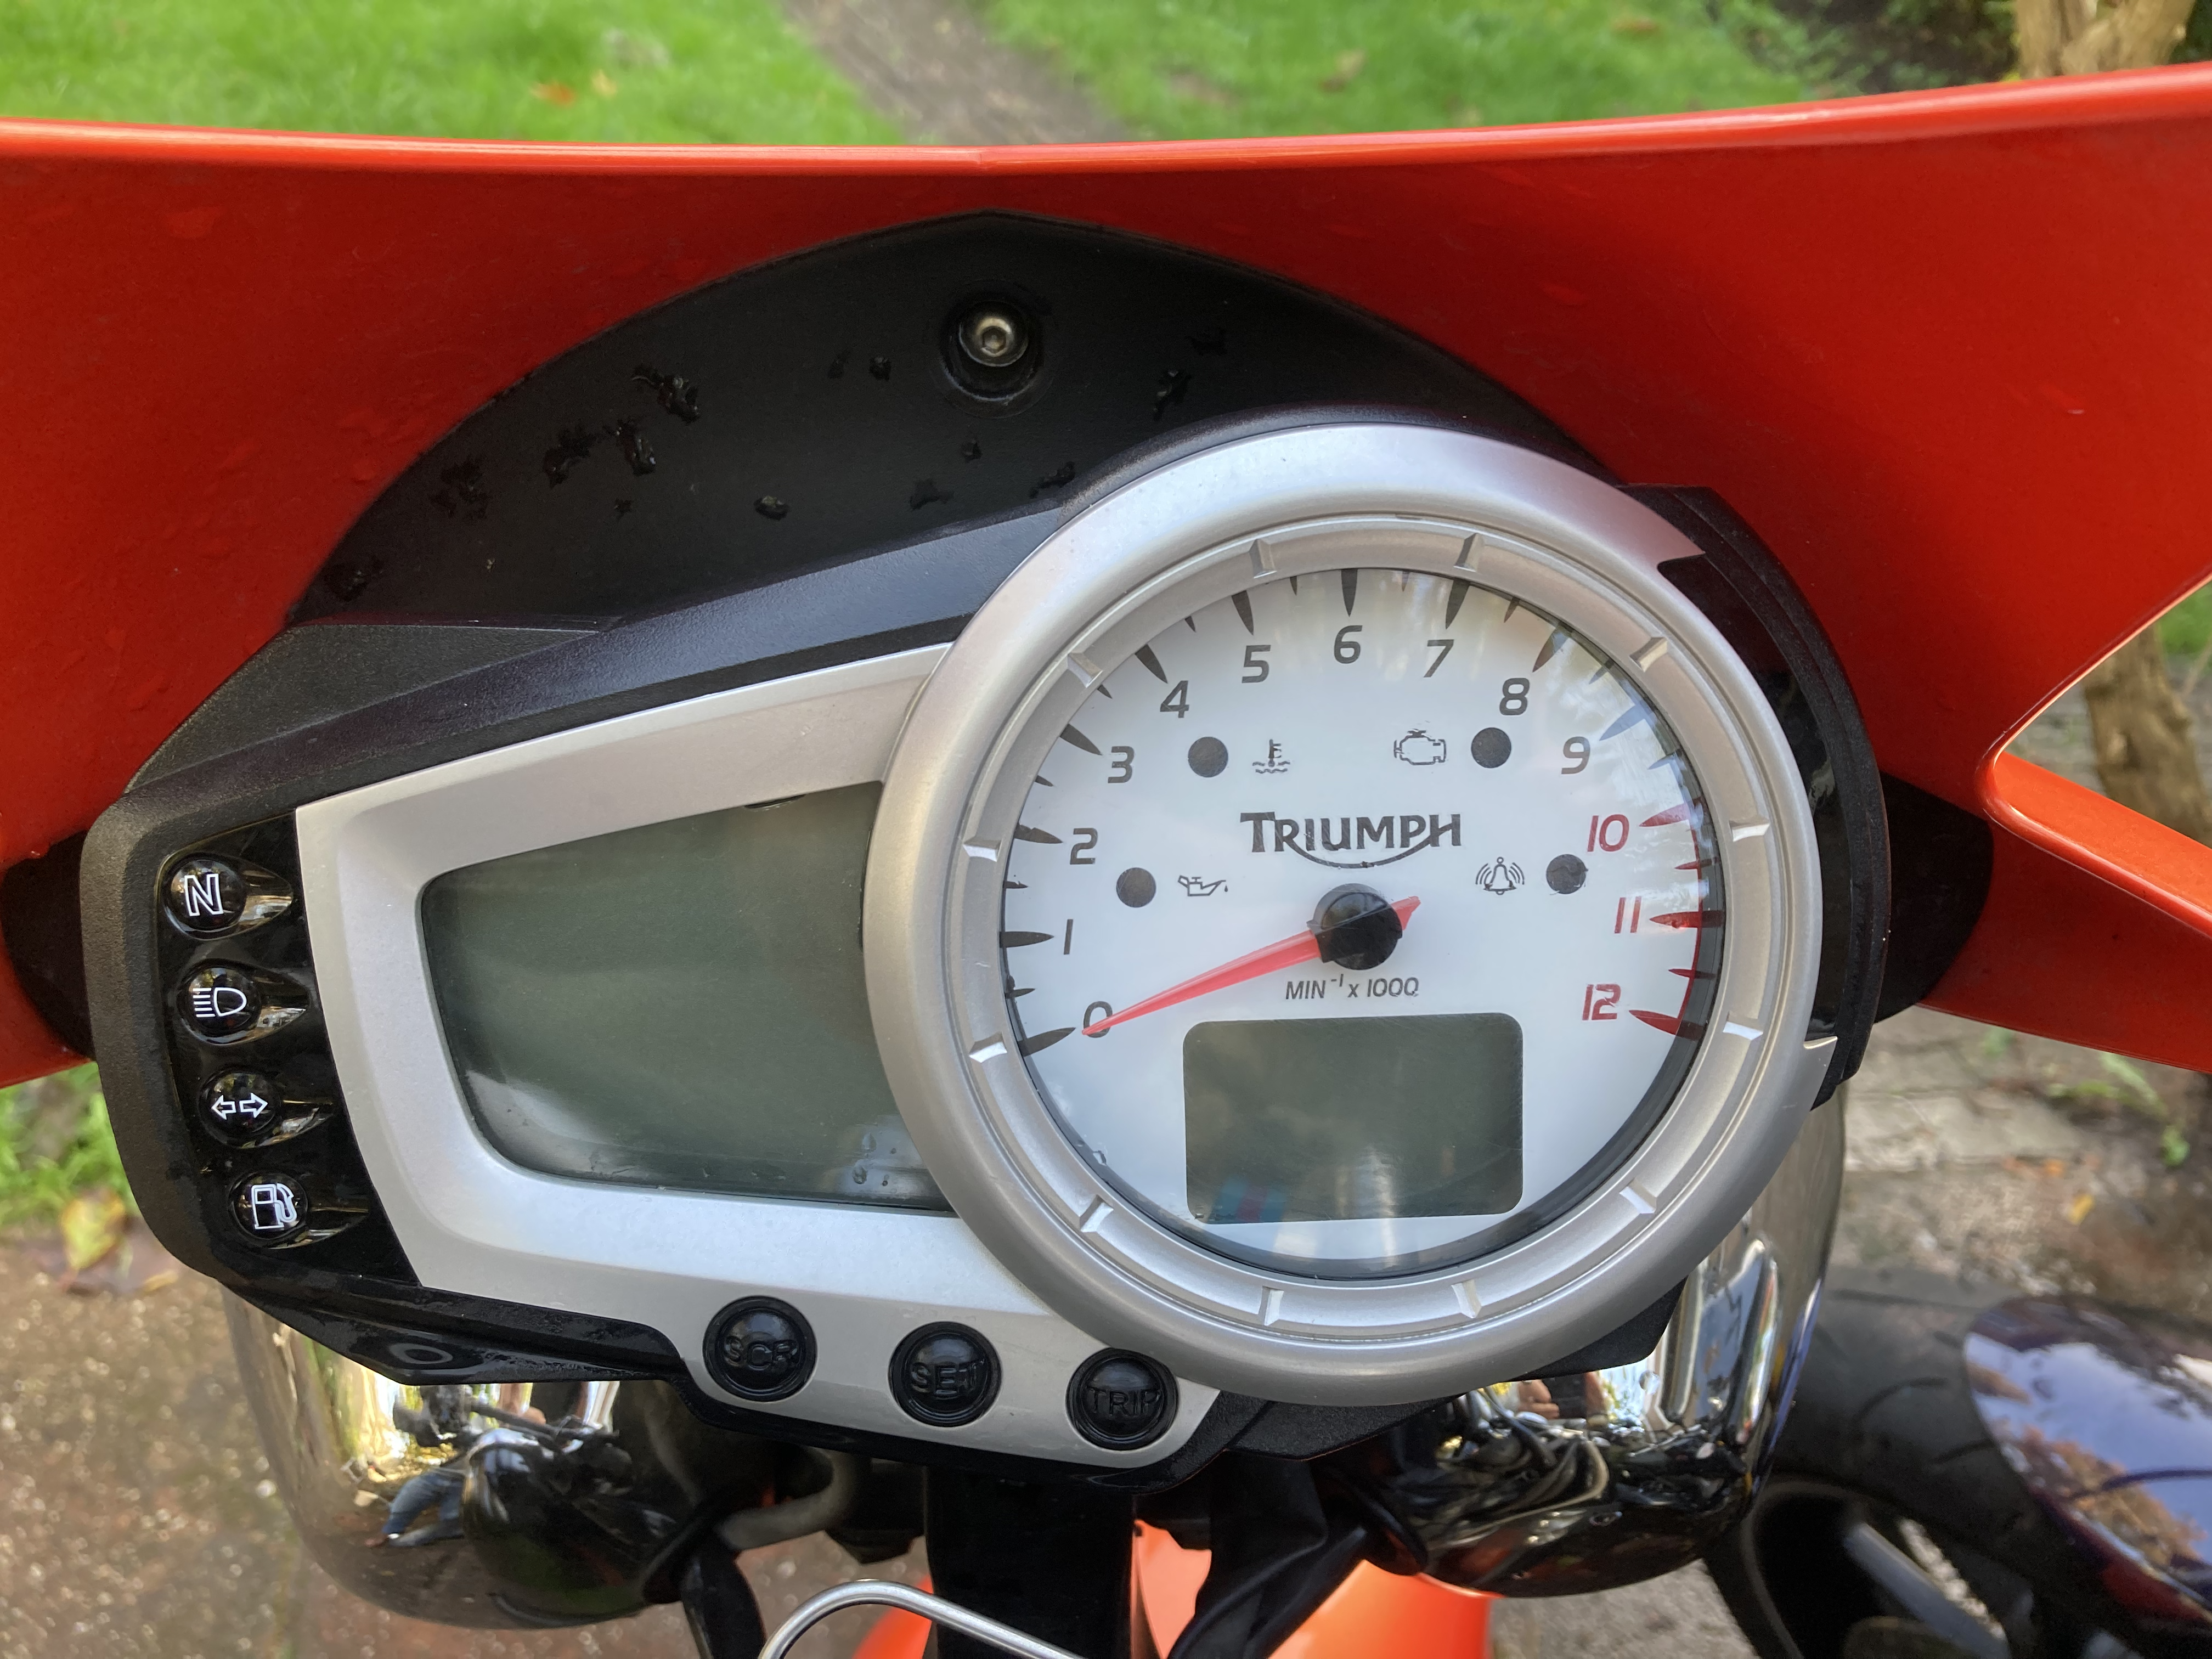 Public Service Announcement for Speed Triple owners